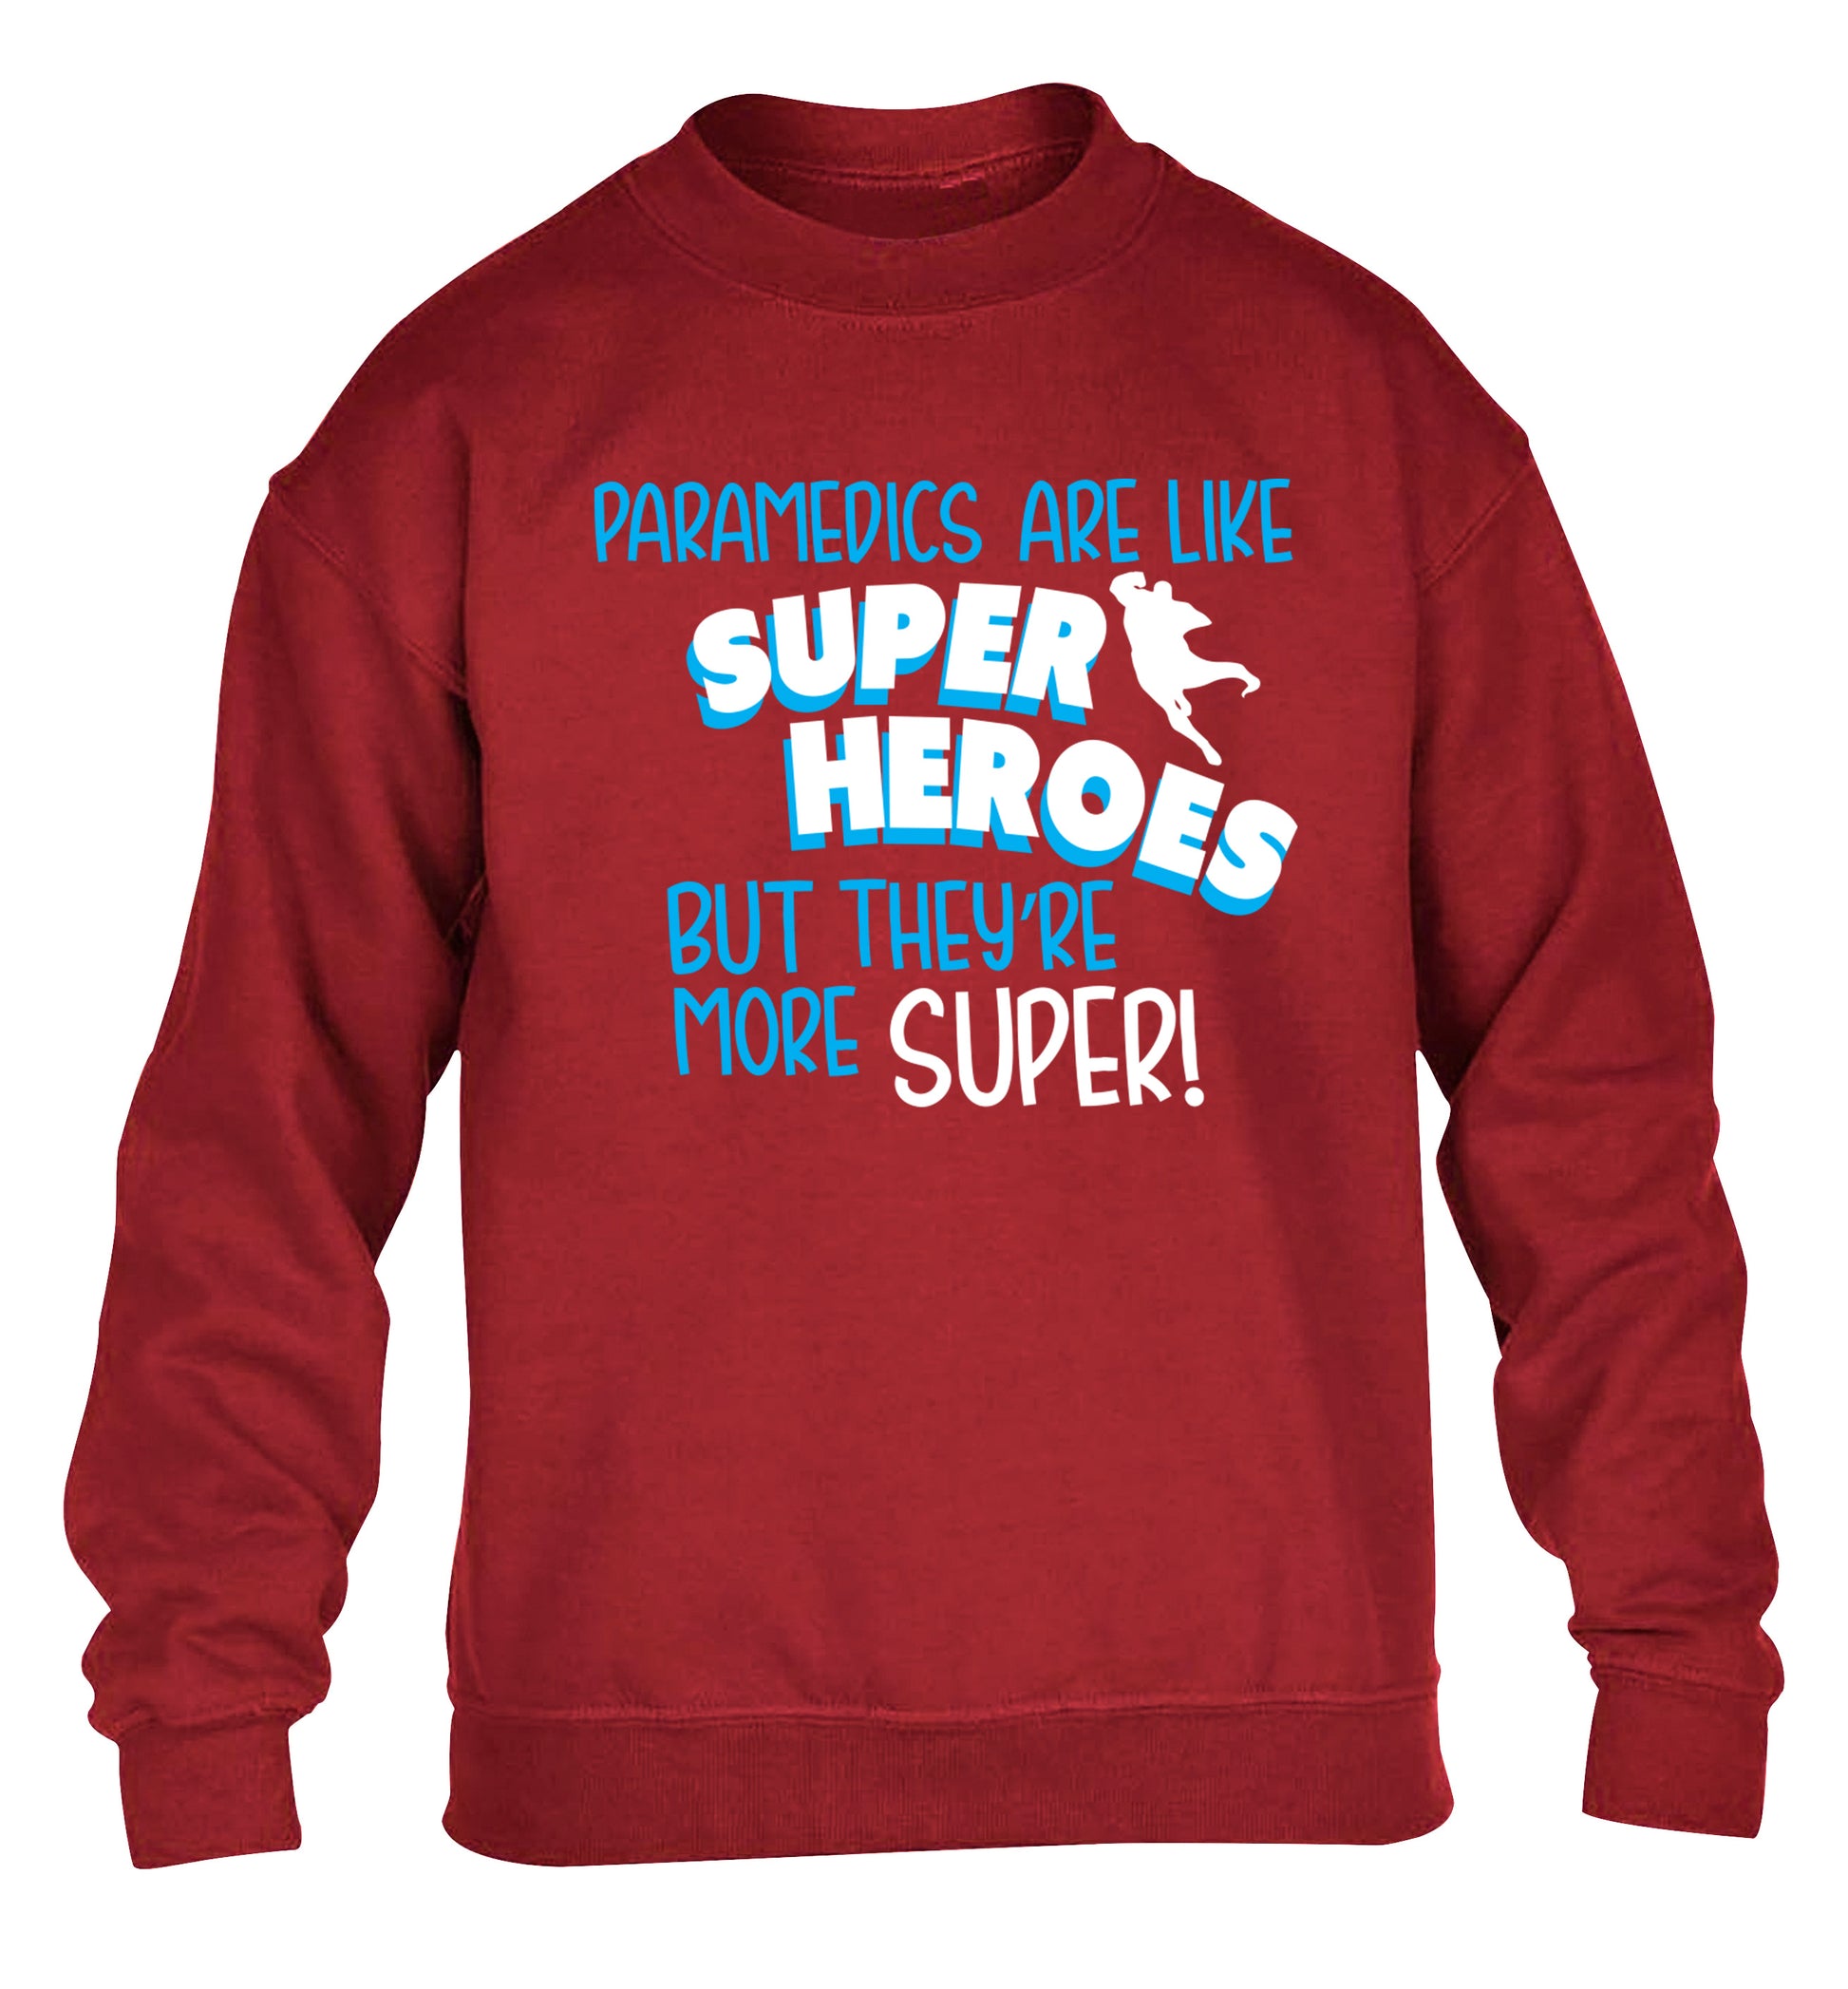 Paramedics are like superheros but they're more super children's grey sweater 12-13 Years